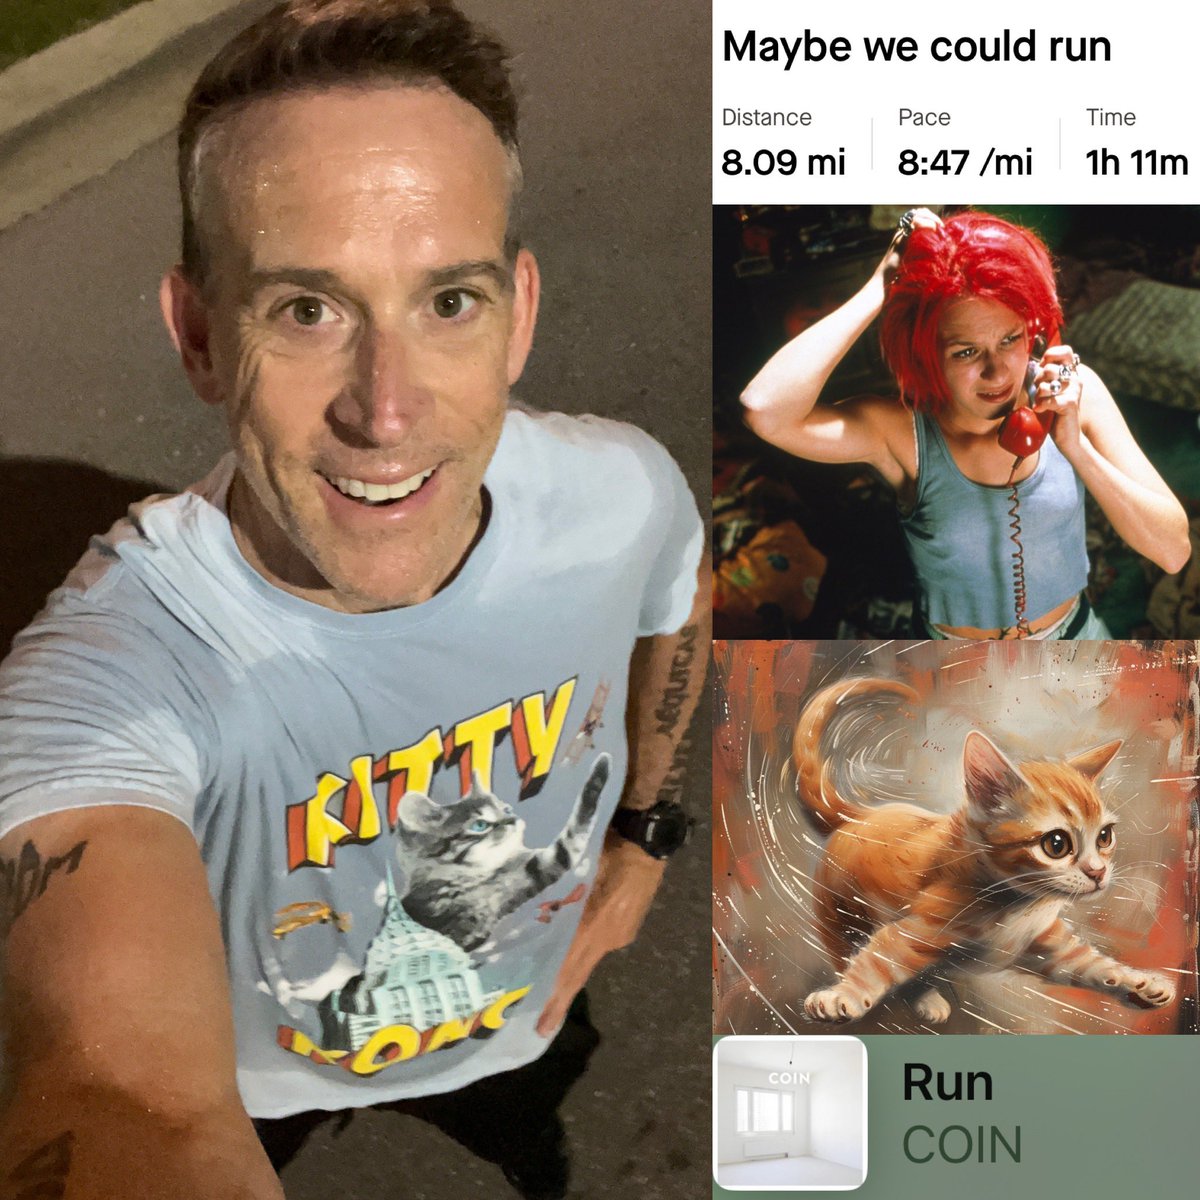 Run Lola Run changed my world when I saw it. So excited it’s being re-released this year. “The ball is round, a game lasts 90 minutes, everything else is pure theory. Off we go!“ #runlolarun #time #running